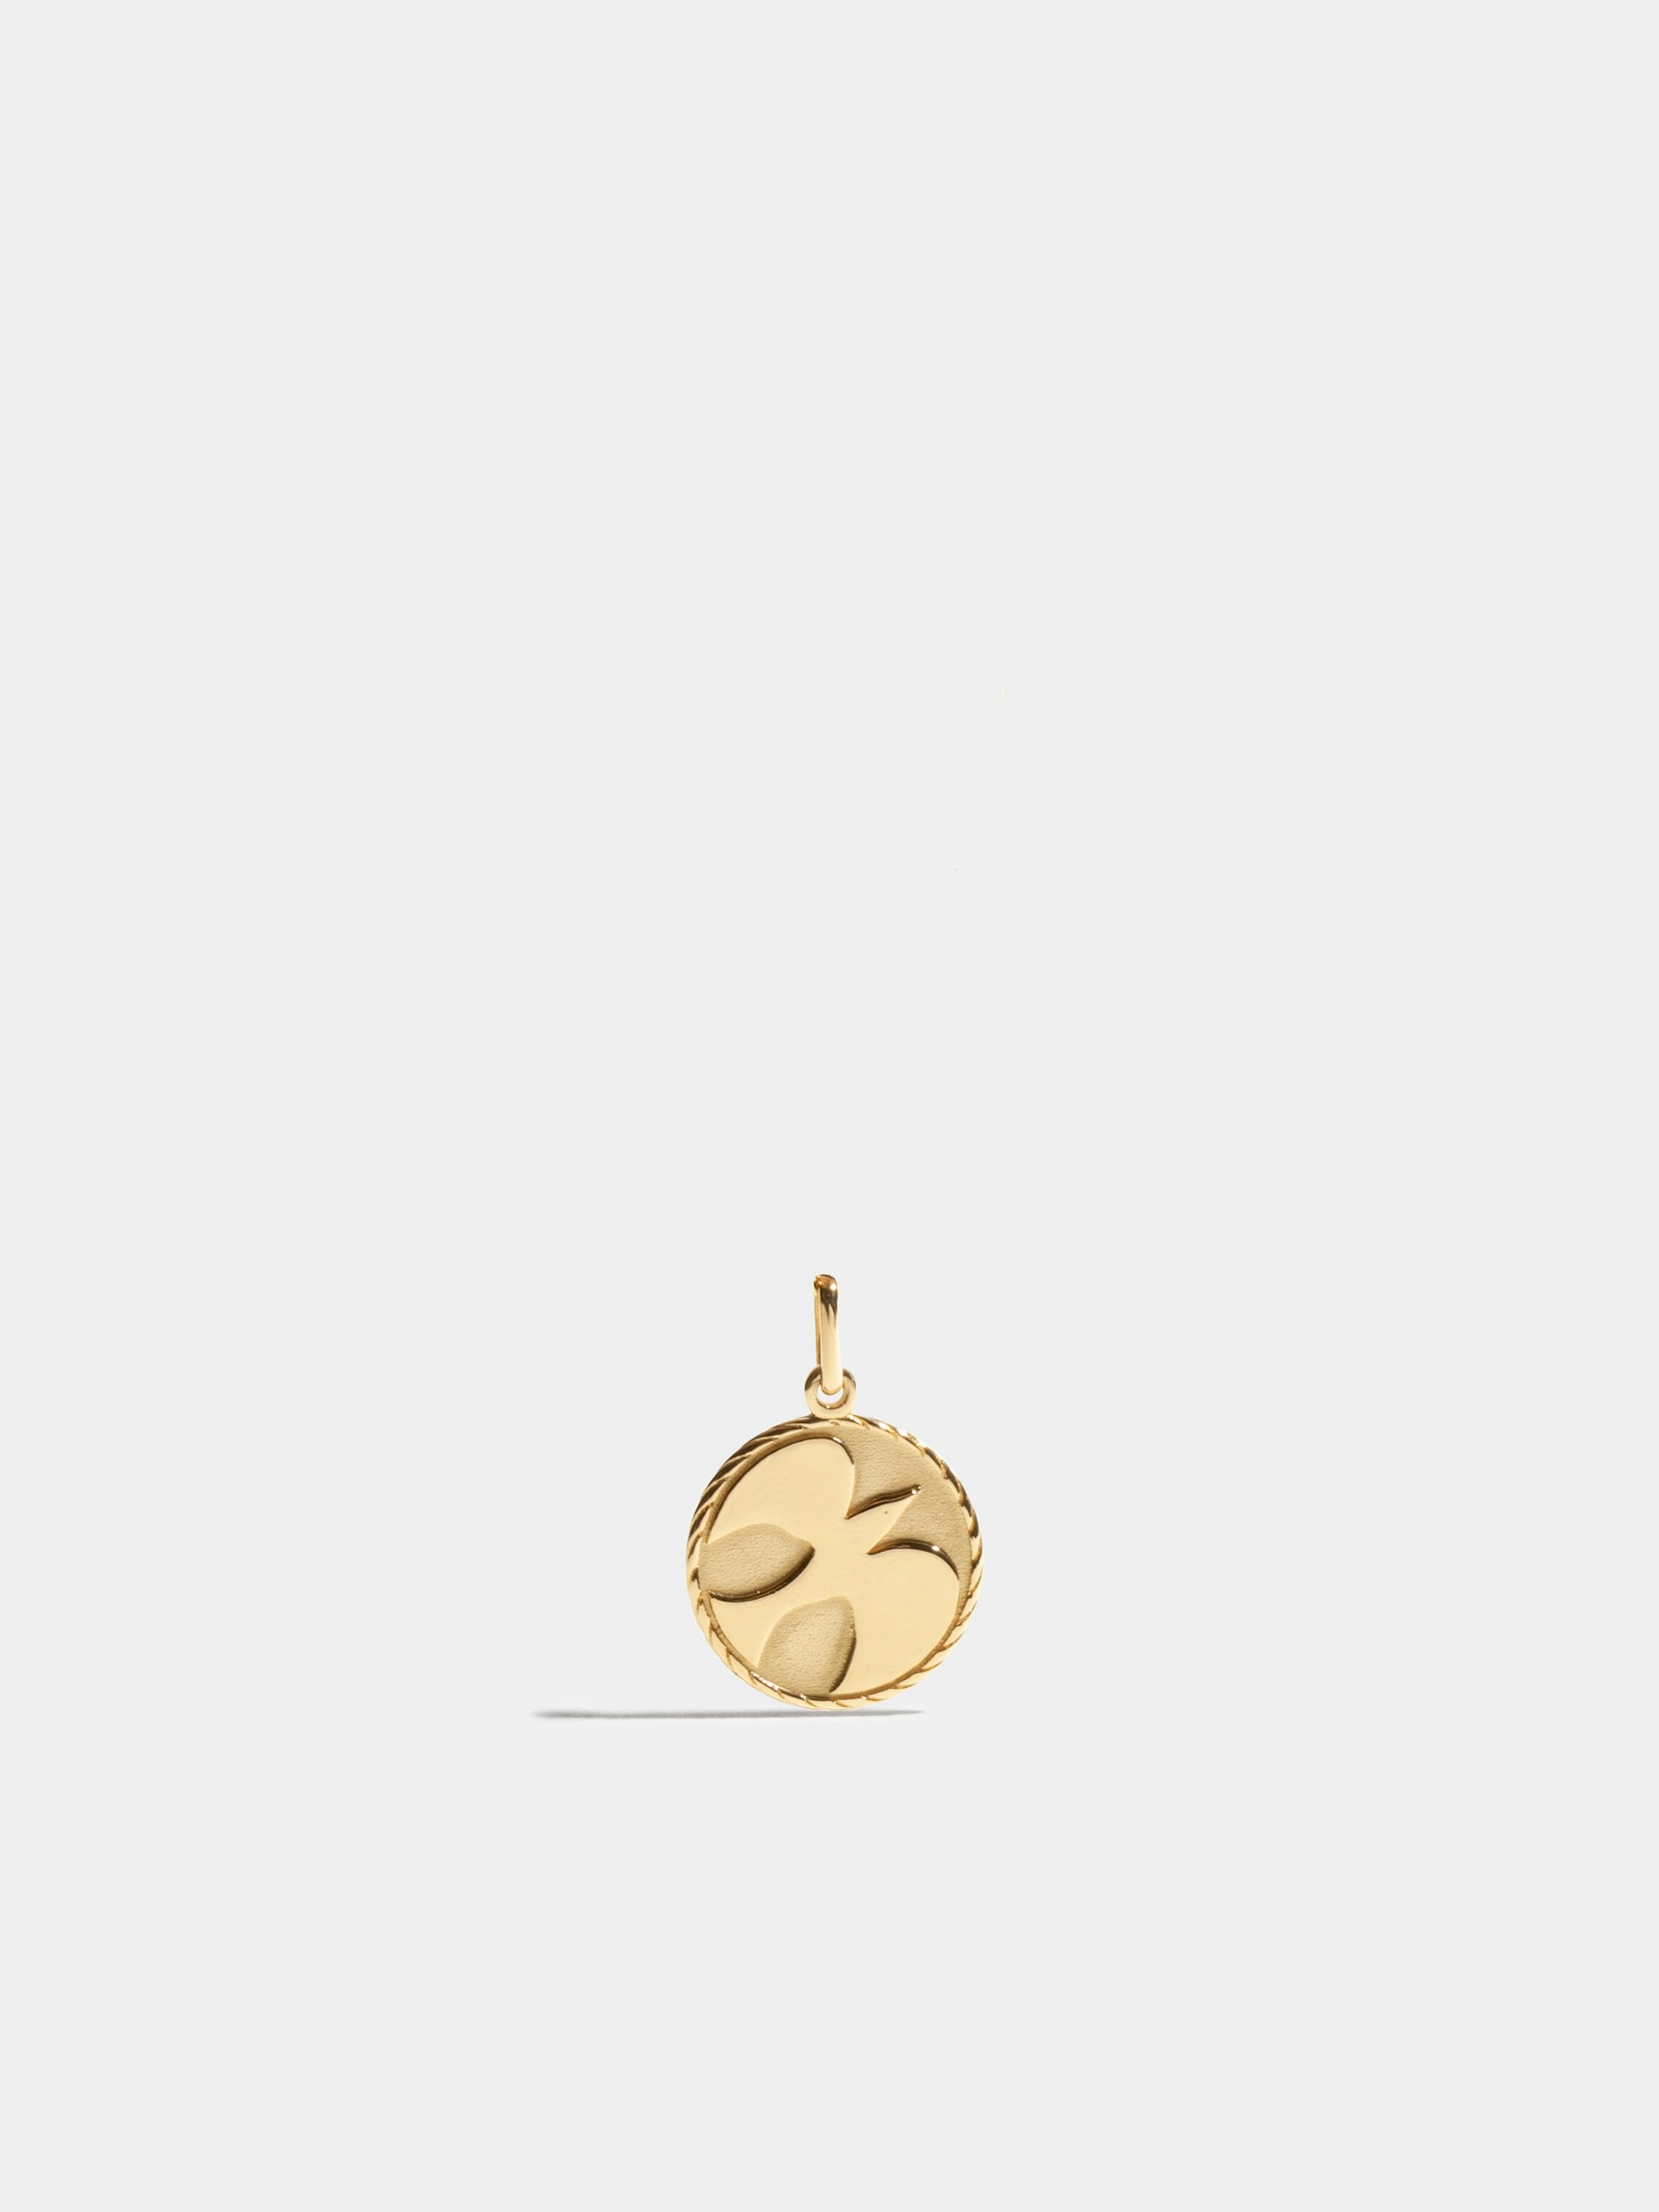 Dove medal in 18k Fairmined ethical yellow gold, on a 45cm chain.